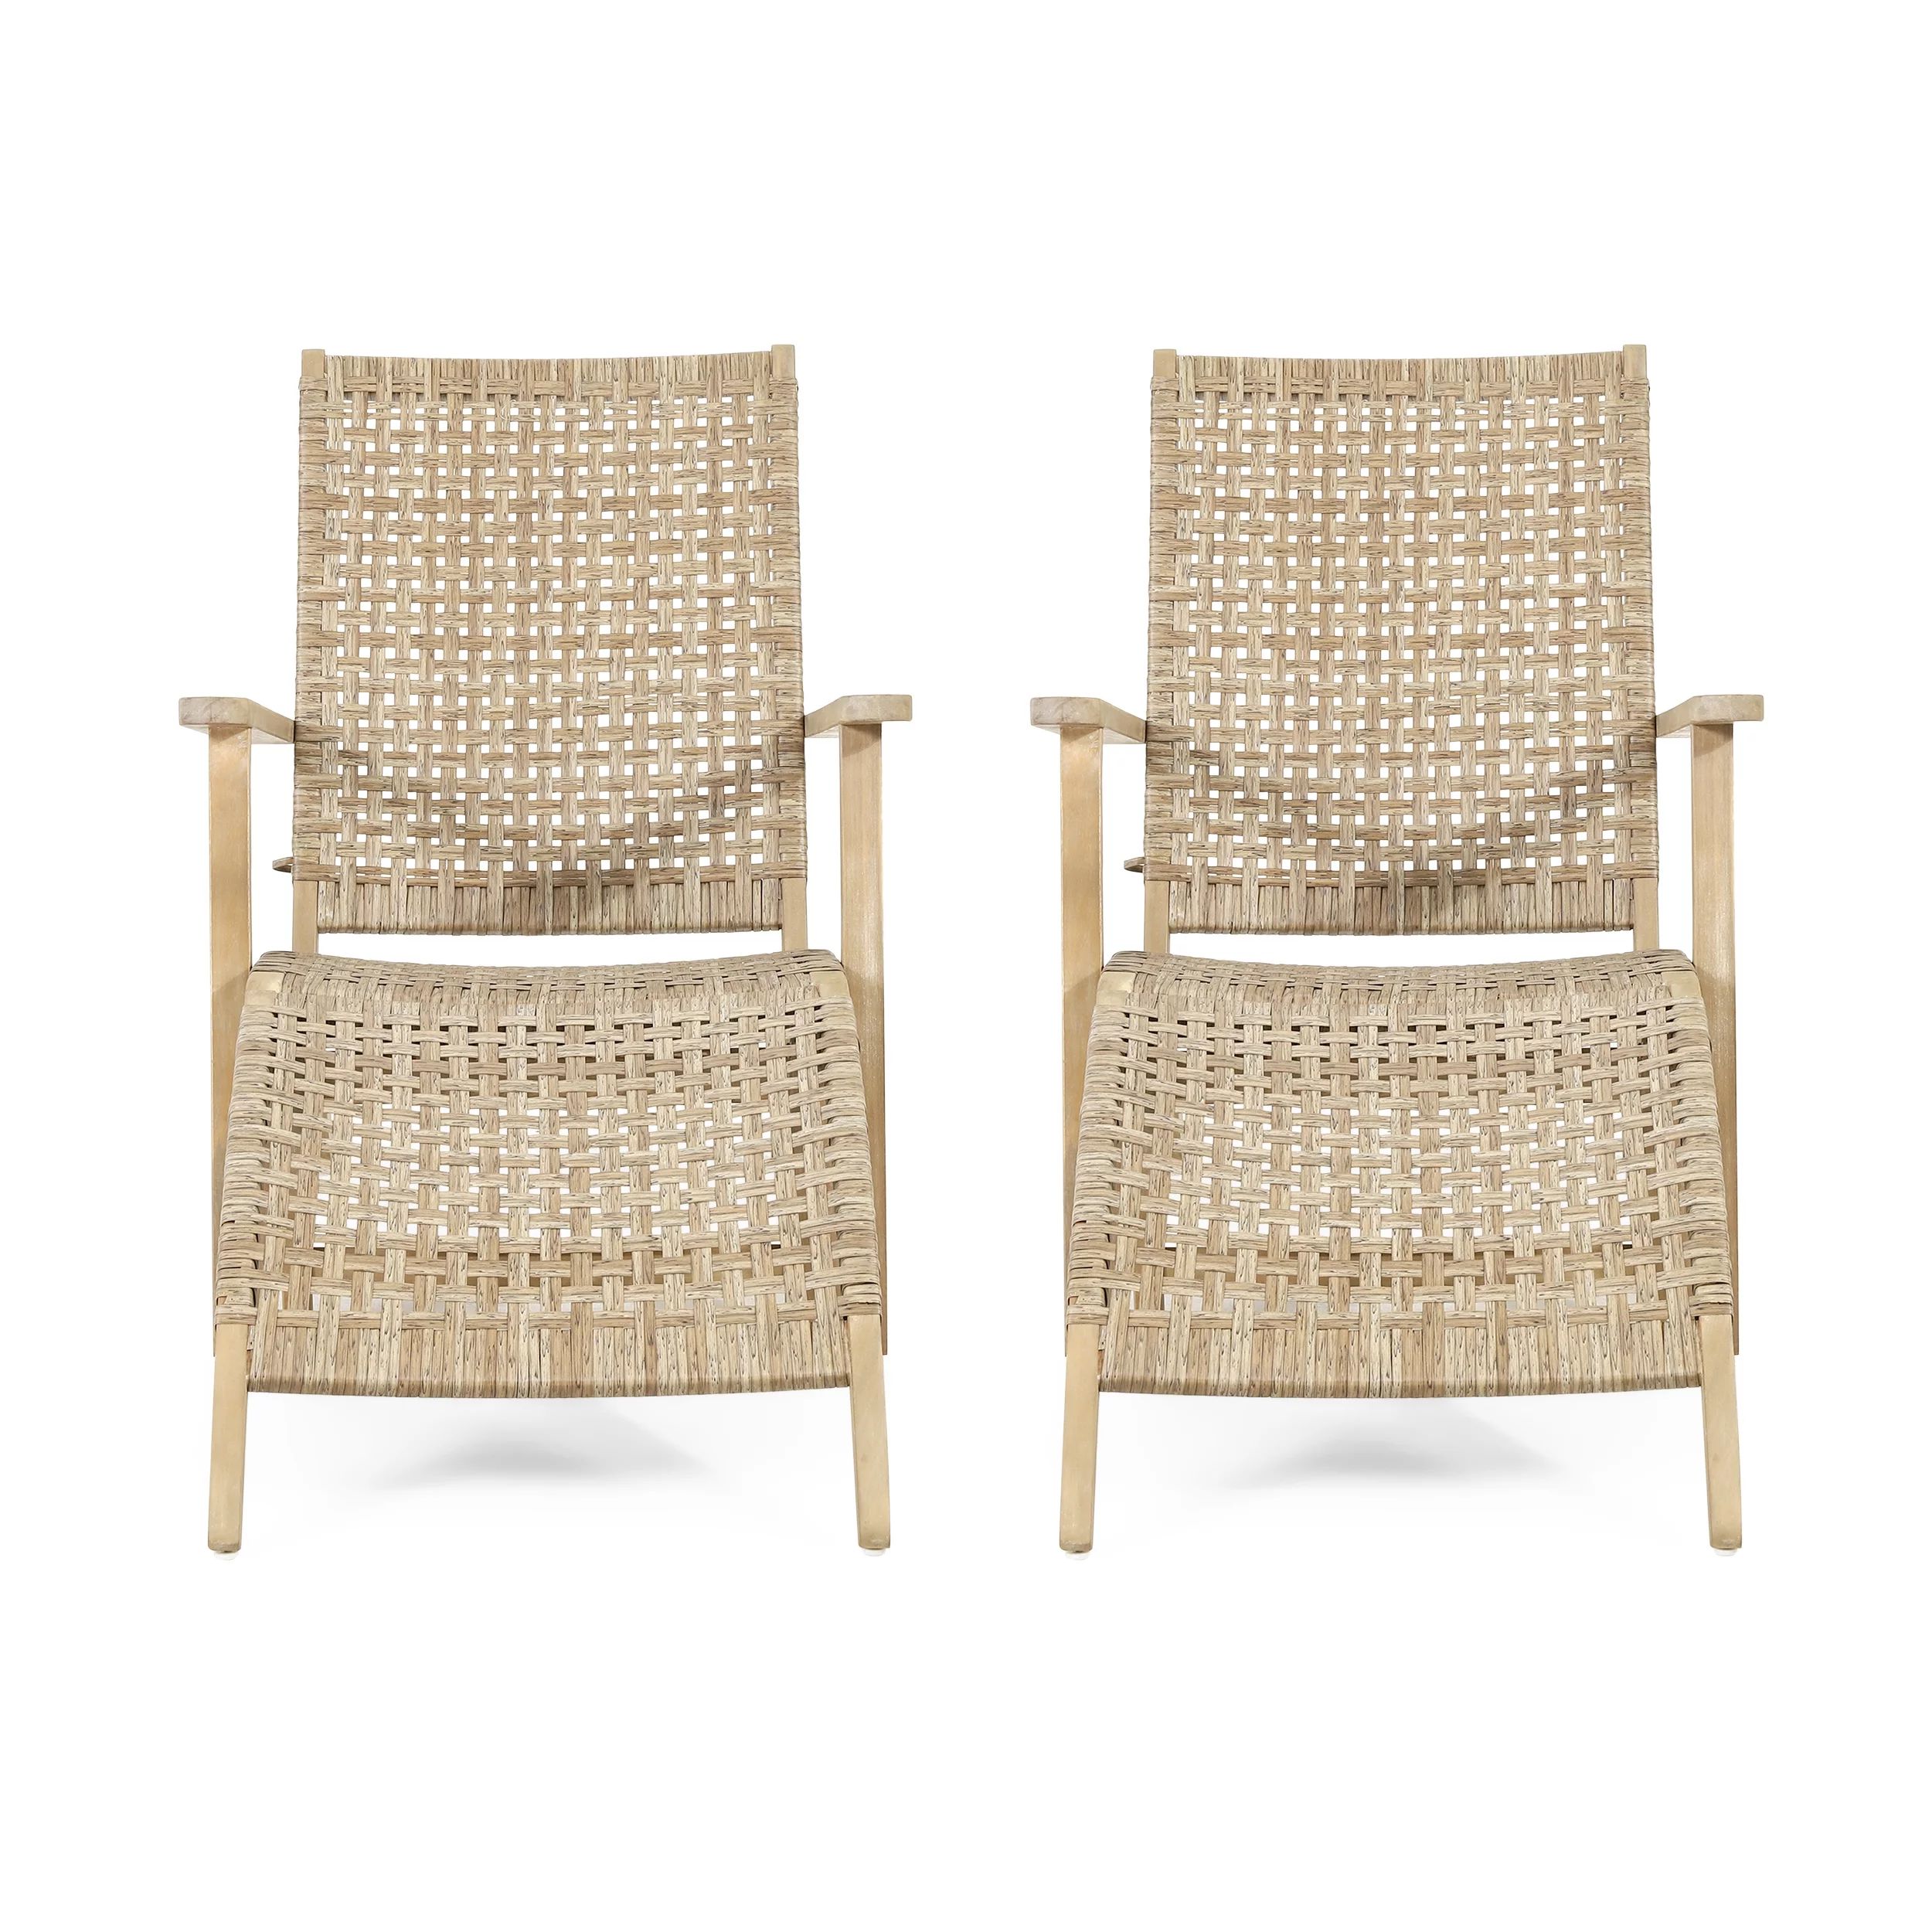 Noble House with Ottoman Acacia Wood Outdoor Lounge Chair - Set of 2 - Light Brown | Walmart (US)